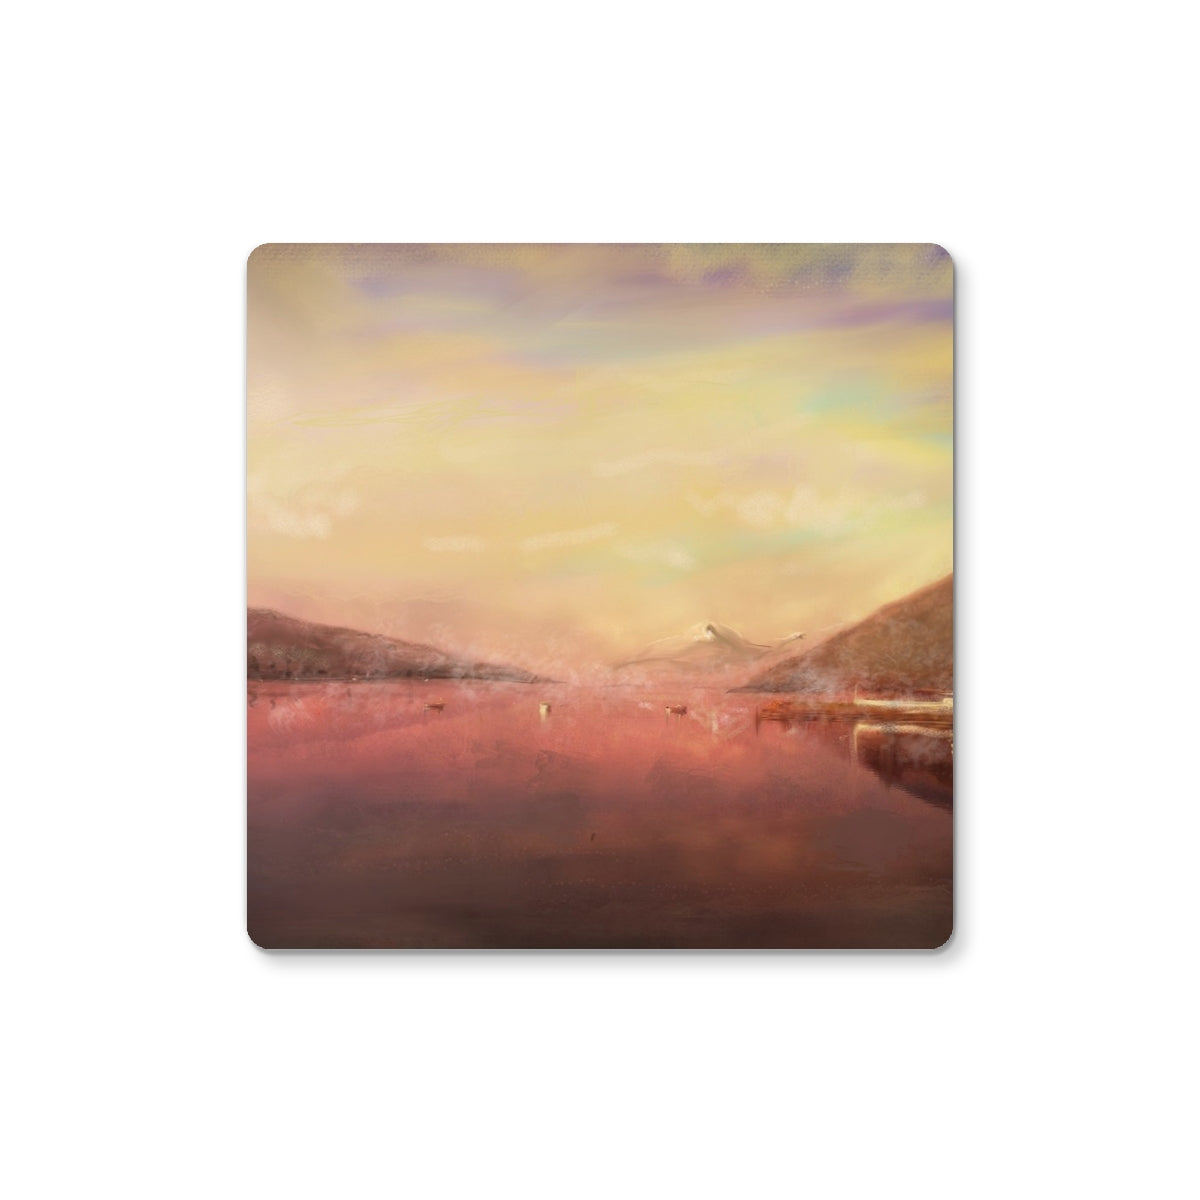 Loch Tay Art Gifts Coaster-Homeware-Scottish Lochs & Mountains Art Gallery-Single Coaster-Paintings, Prints, Homeware, Art Gifts From Scotland By Scottish Artist Kevin Hunter